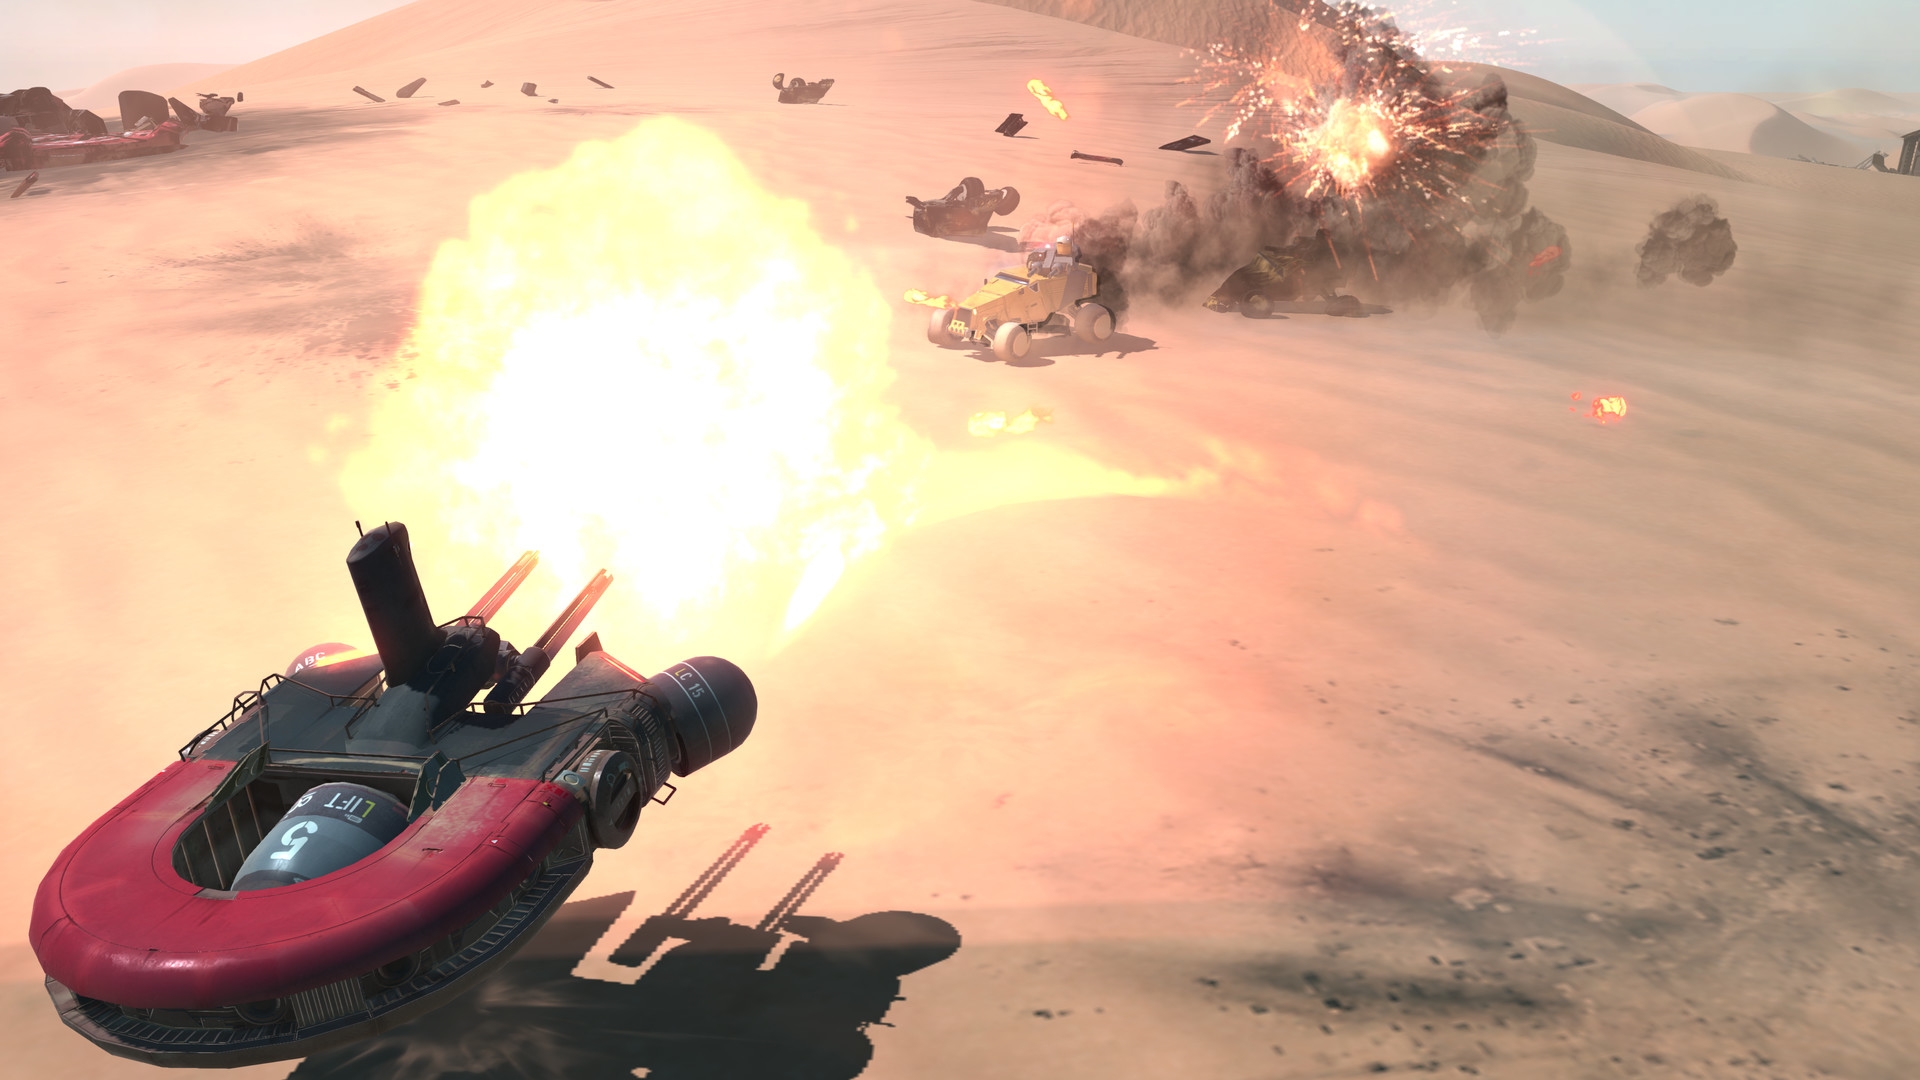 Promotional still from ‘Homeworld: Deserts of Kharak.’ A red tank with a U-shaped turret sends fiery blasts toward enemies in the distance. Desert environment, 2016 PC game graphics. | DeviceDaily.com